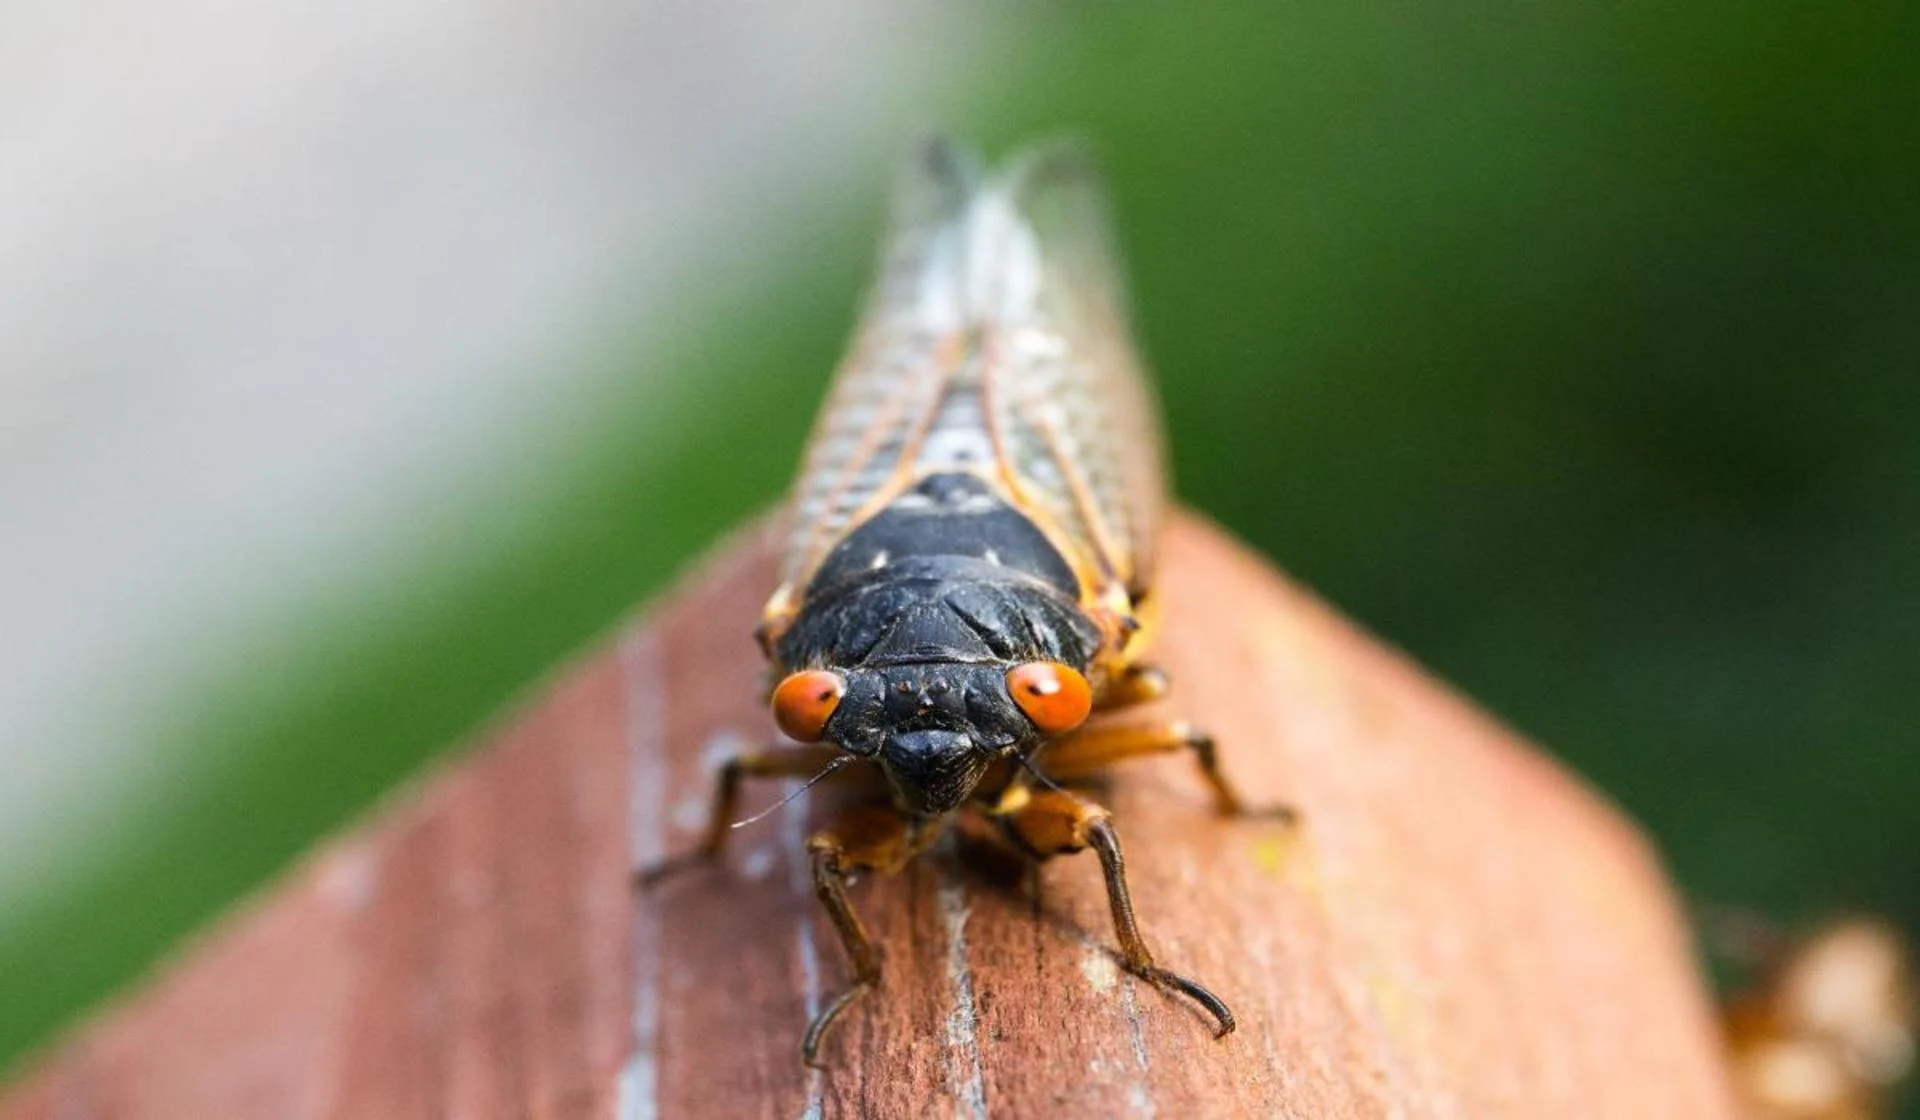 Get ready: This spring will see the biggest cicada emergence since the 1800s